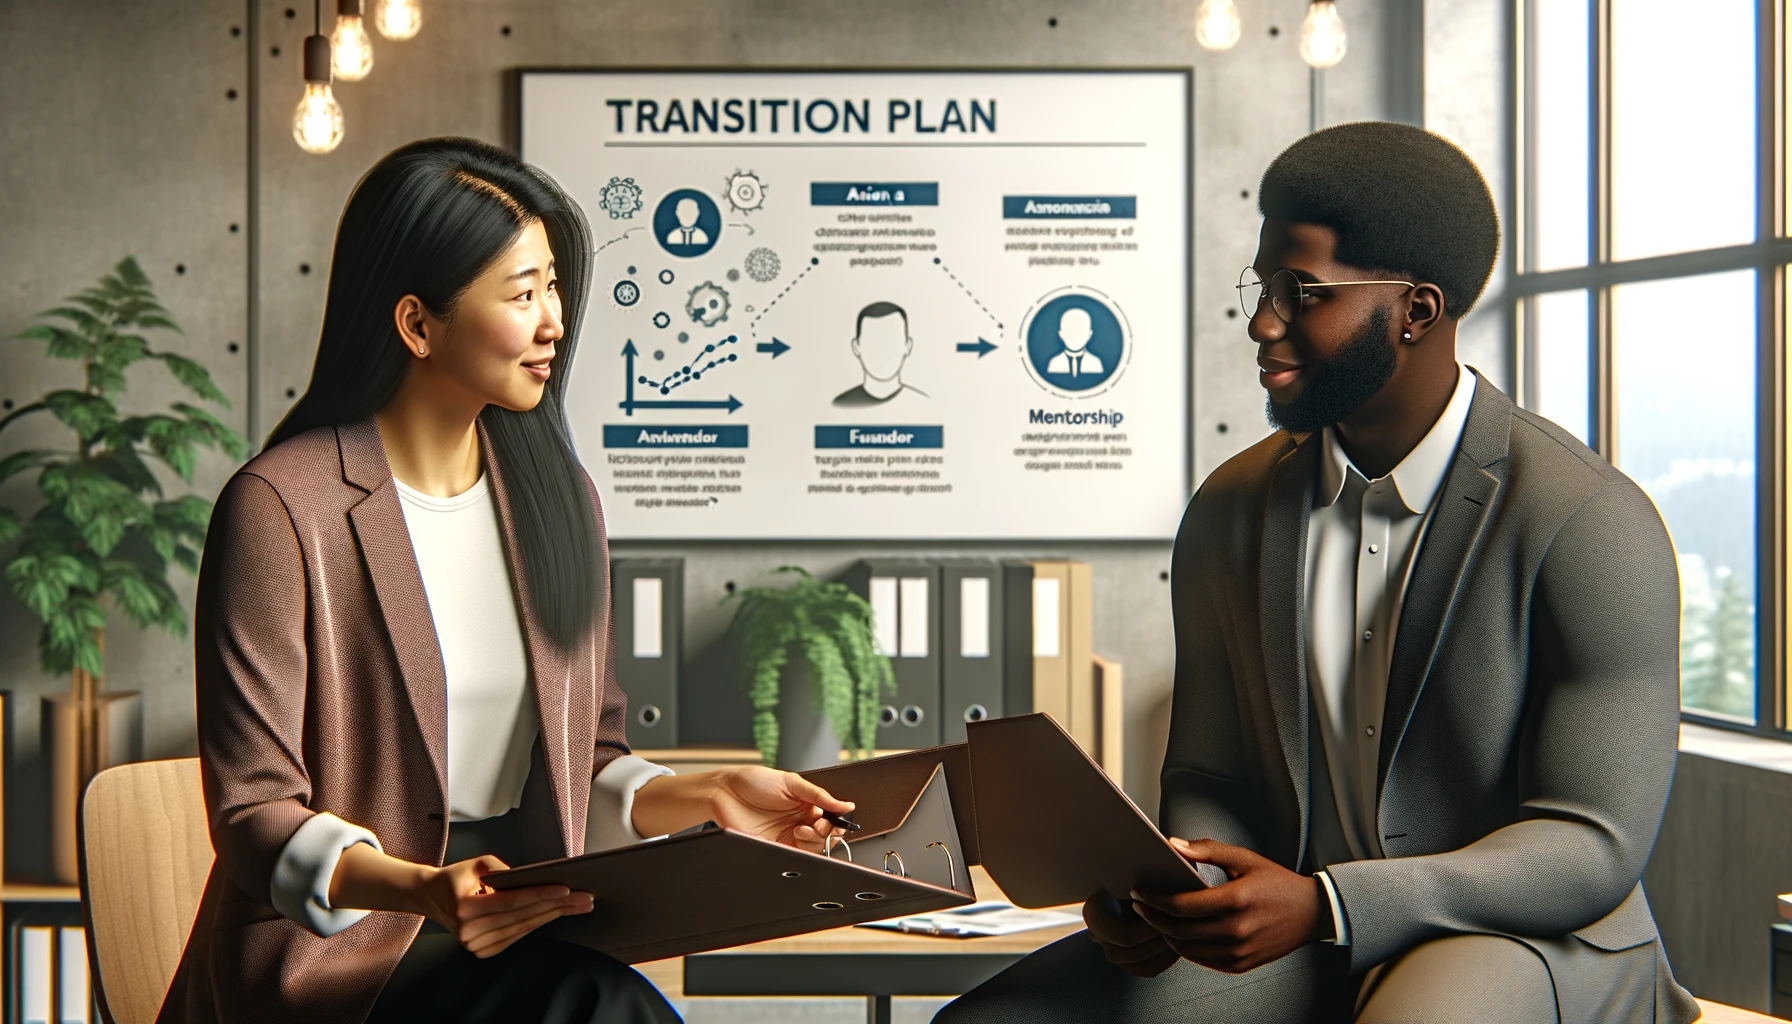 Two professionals, an Asian woman and a Black man in a well-lit office setting with whiteboard conversing about a business transition plan.